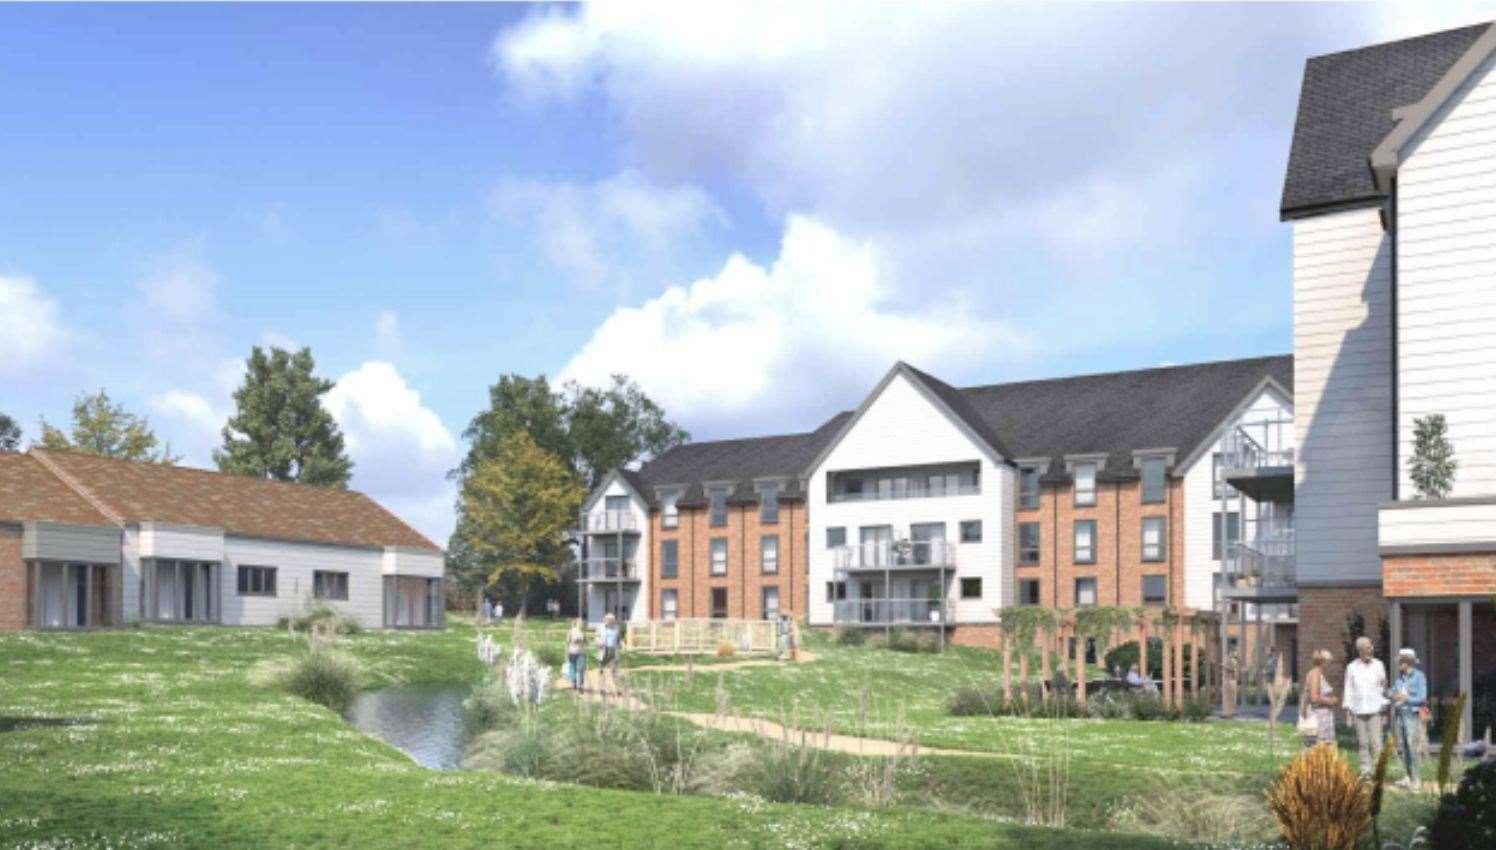 Work is set to start on the new £21 million development in Herne Bay. Picture: McGroff Group